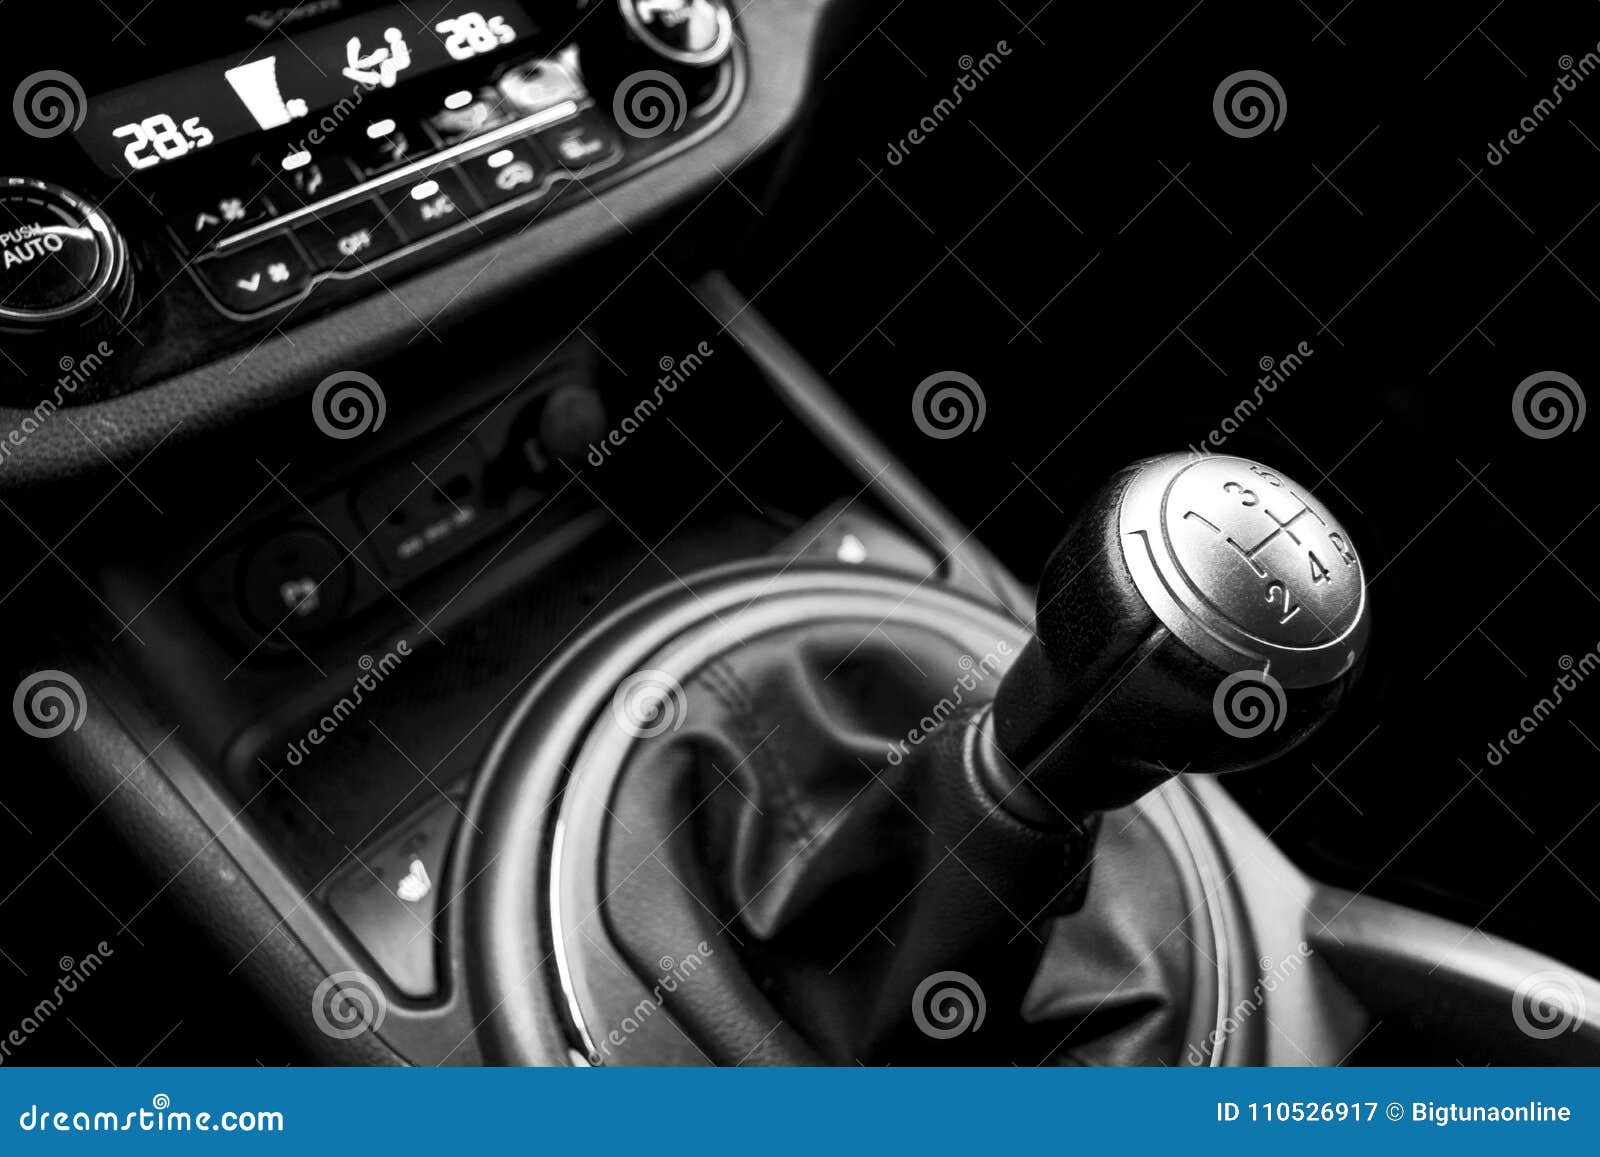 close up view of a gear lever shift. manual gearbox. car interior details. car transmission. soft lighting. abstract view. black